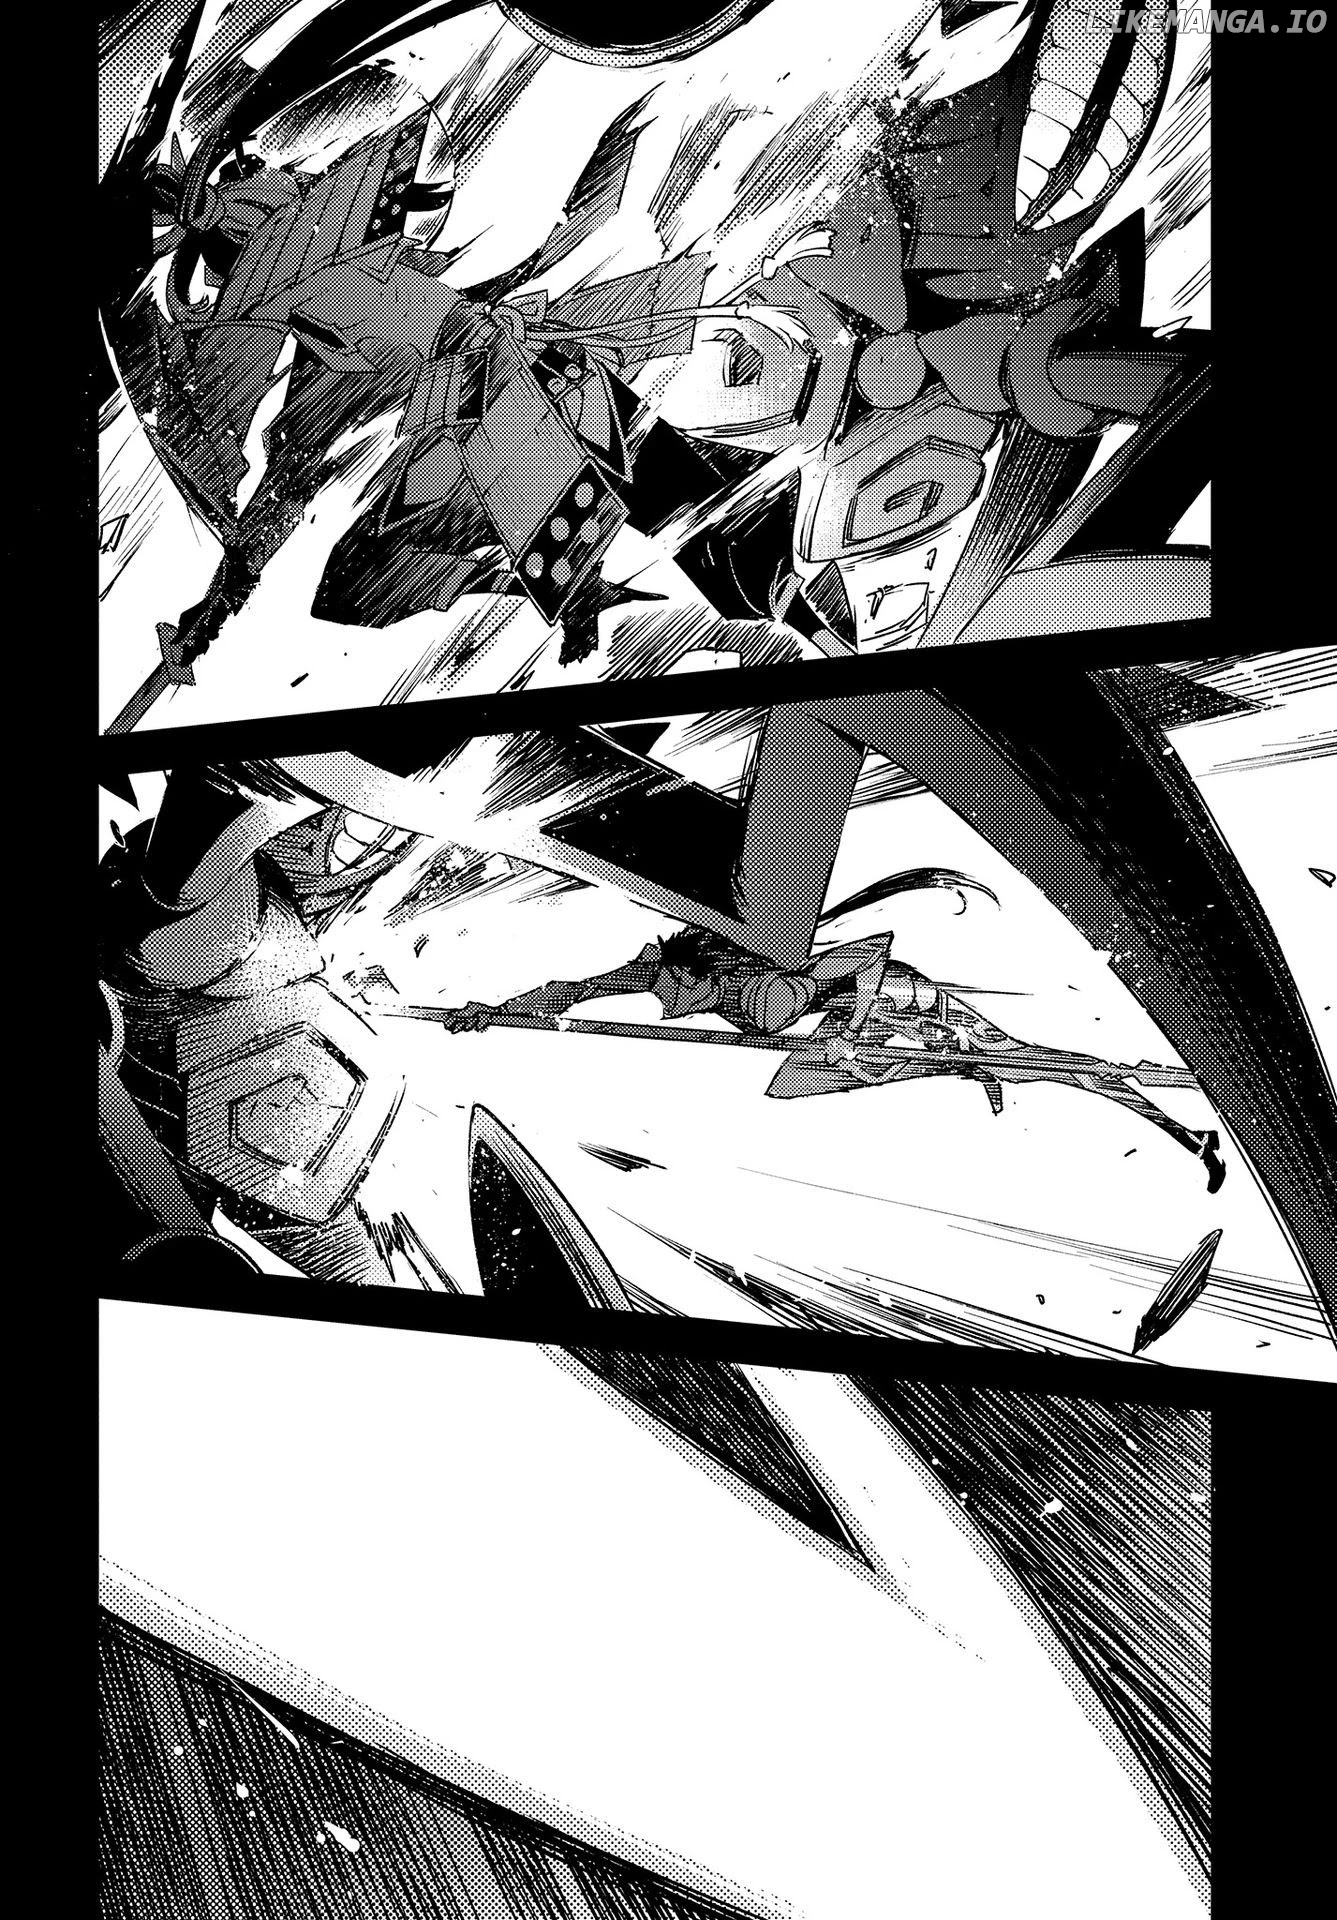 Fate/Grand Order: Epic of Remnant - Subspecies Singularity IV: Taboo Advent Salem: Salem of Heresy chapter 10 - page 14